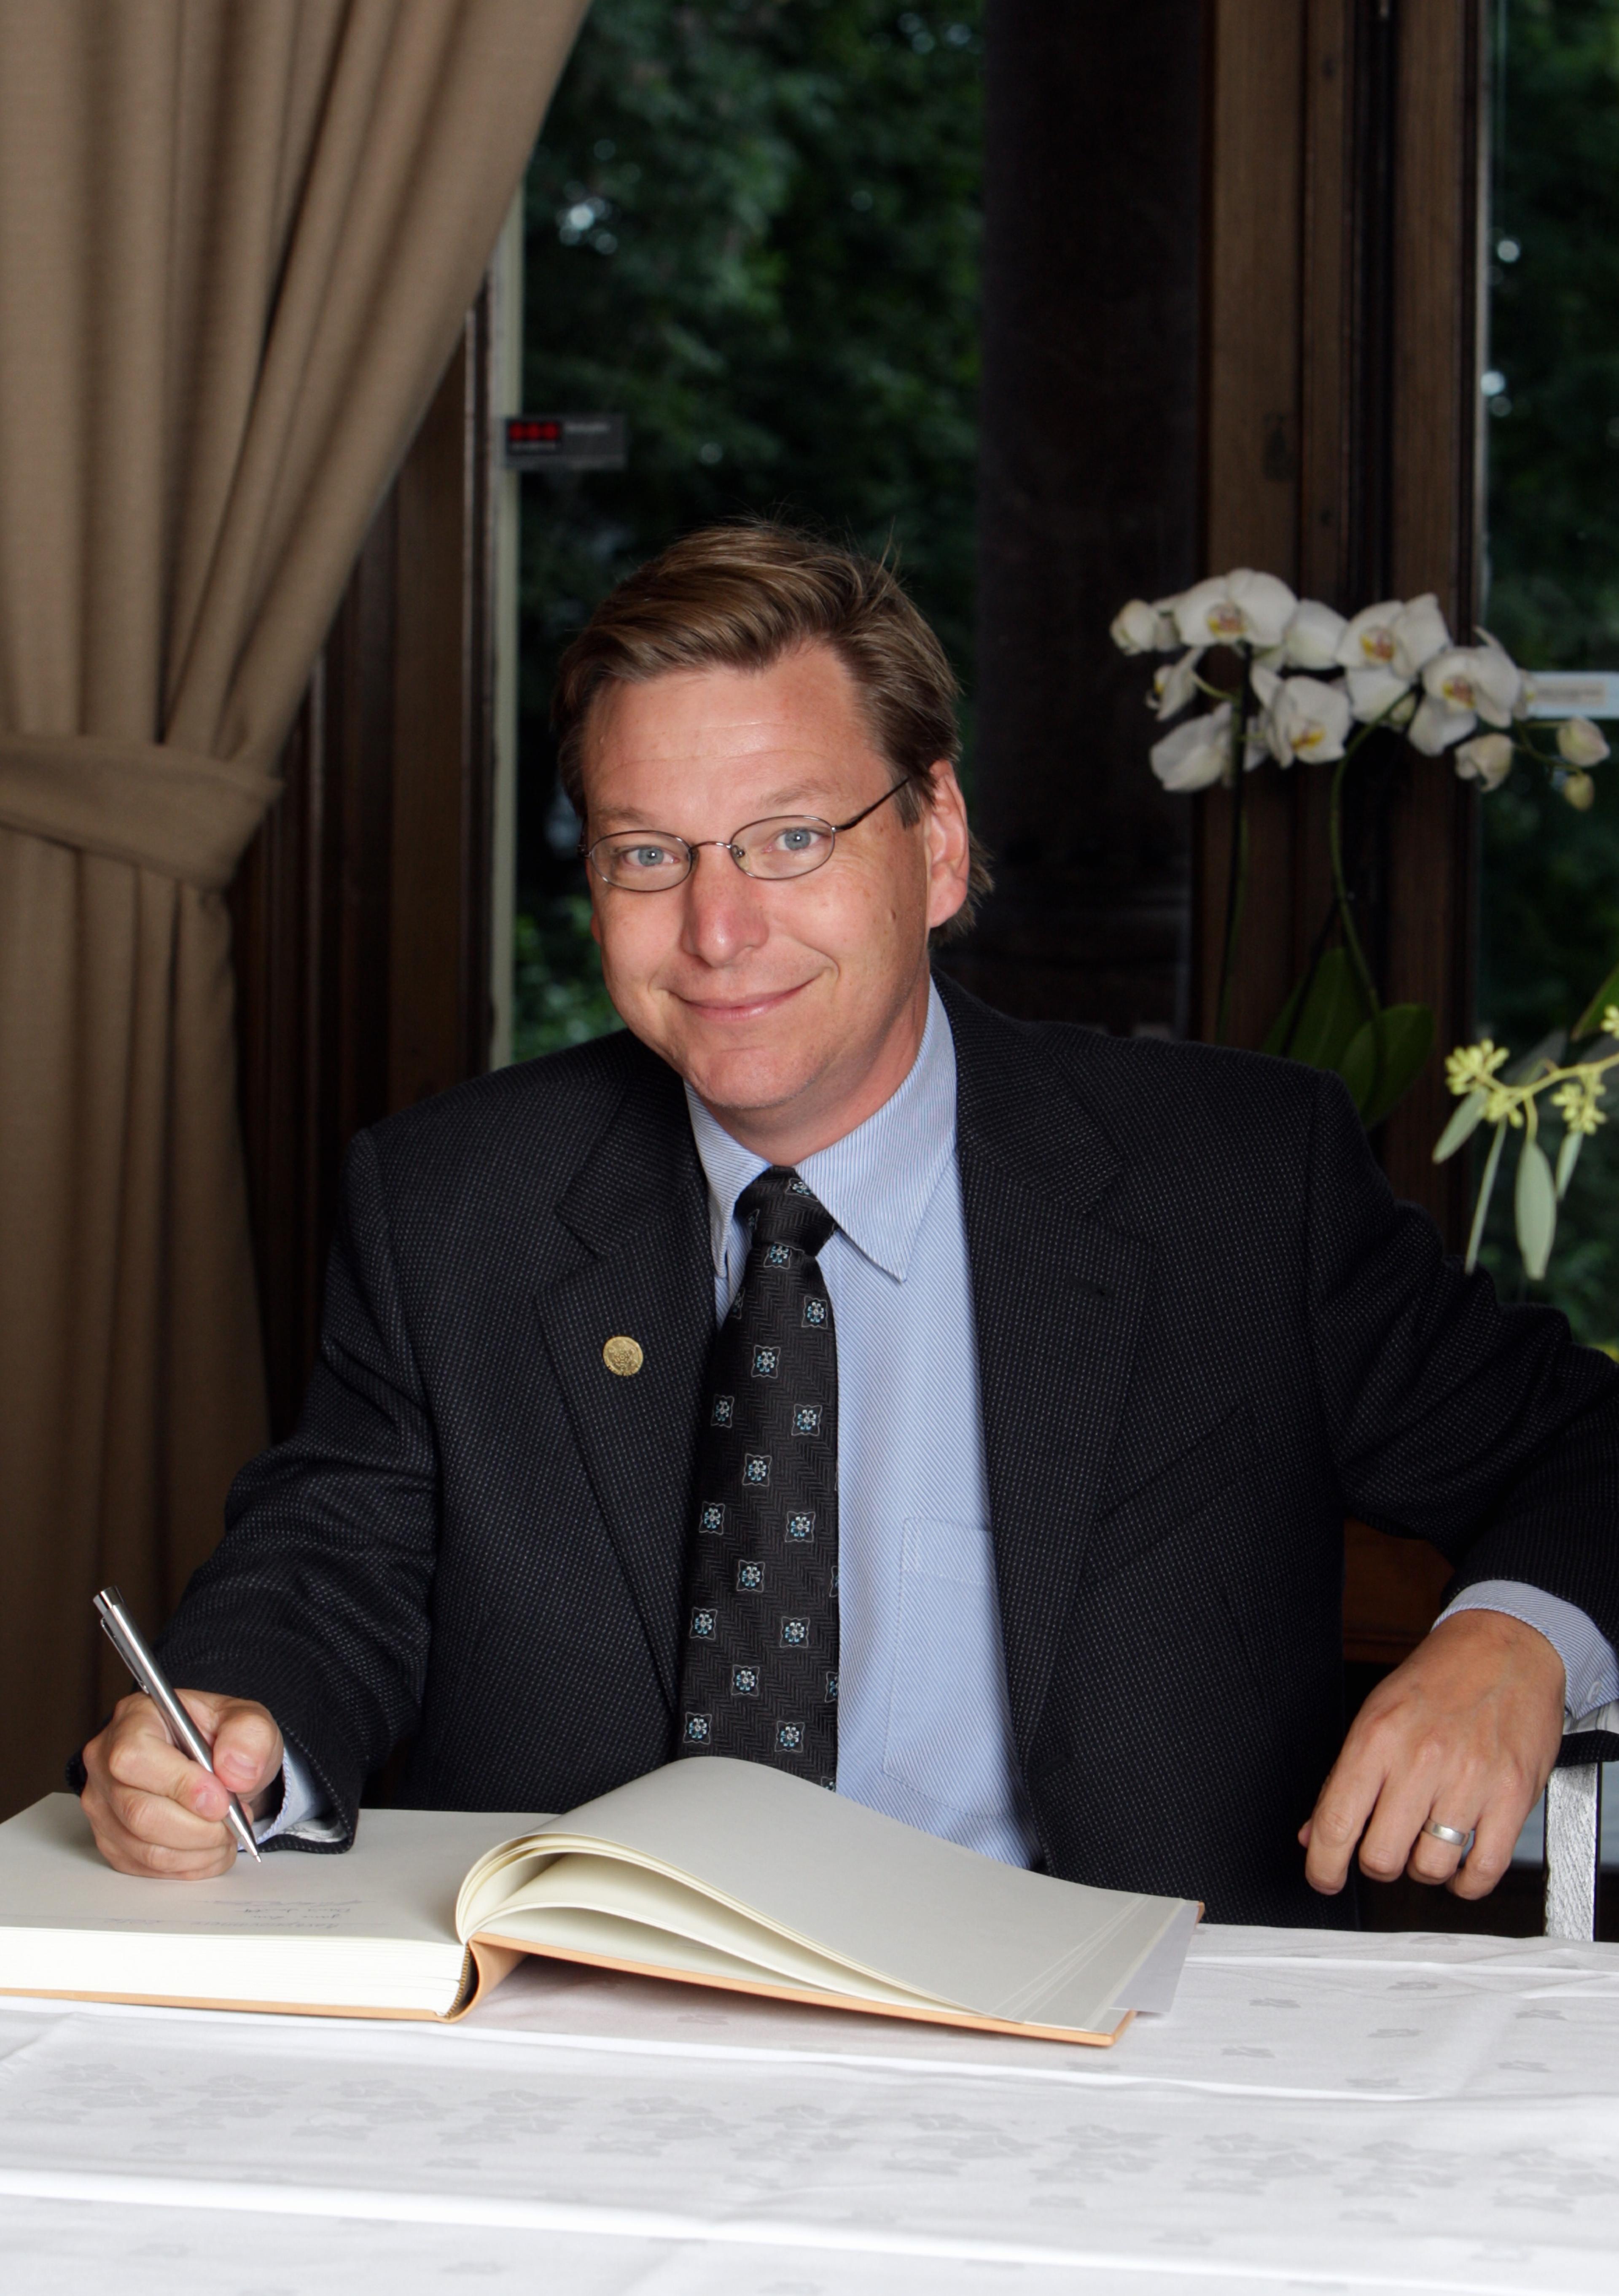 Michael E. Brown signing the guest book at the Norwegian Academy of Science and Letters during the Kavli Prize week in Oslo